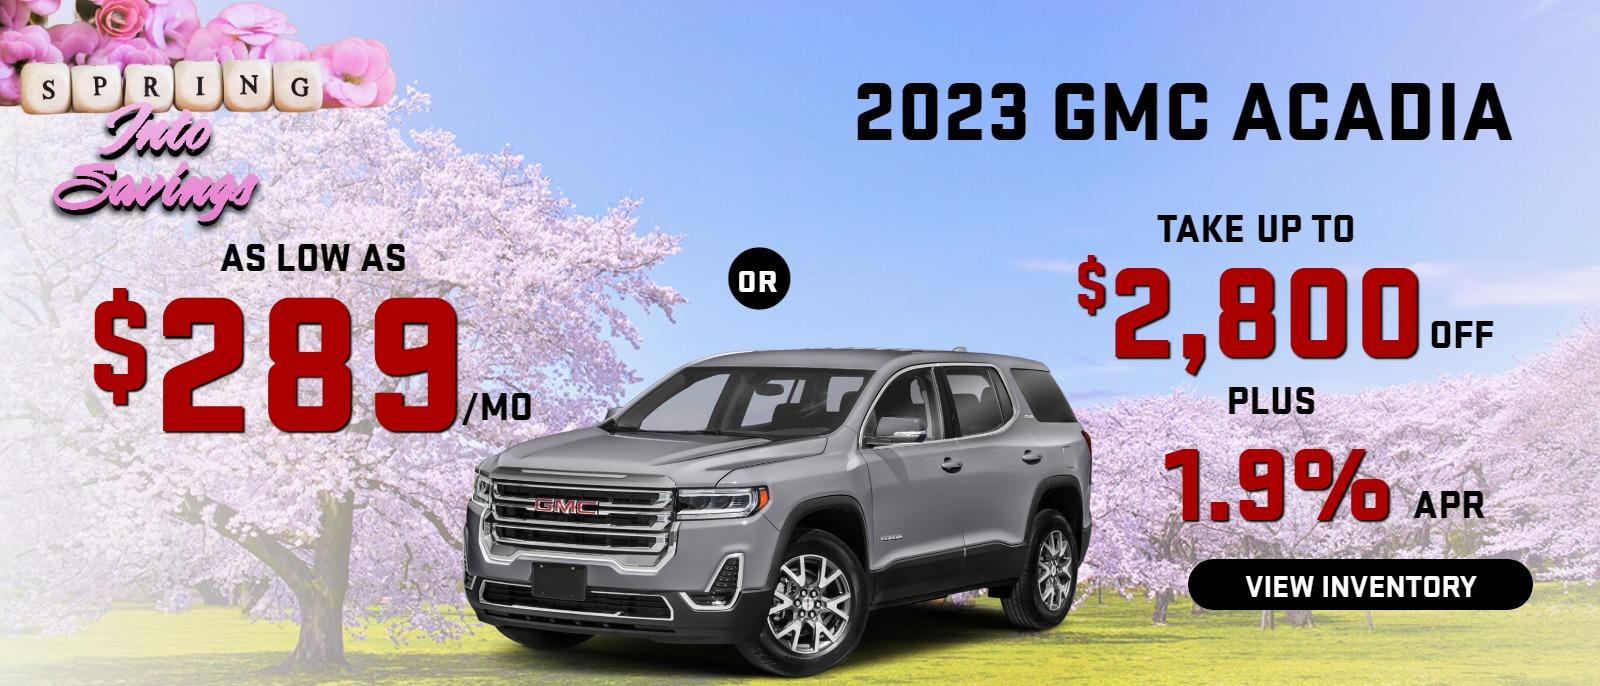 2023 Acadia
Stock G6065
$289/mo
or
take up to $2800 OFF 
PLUS
1.9% finance